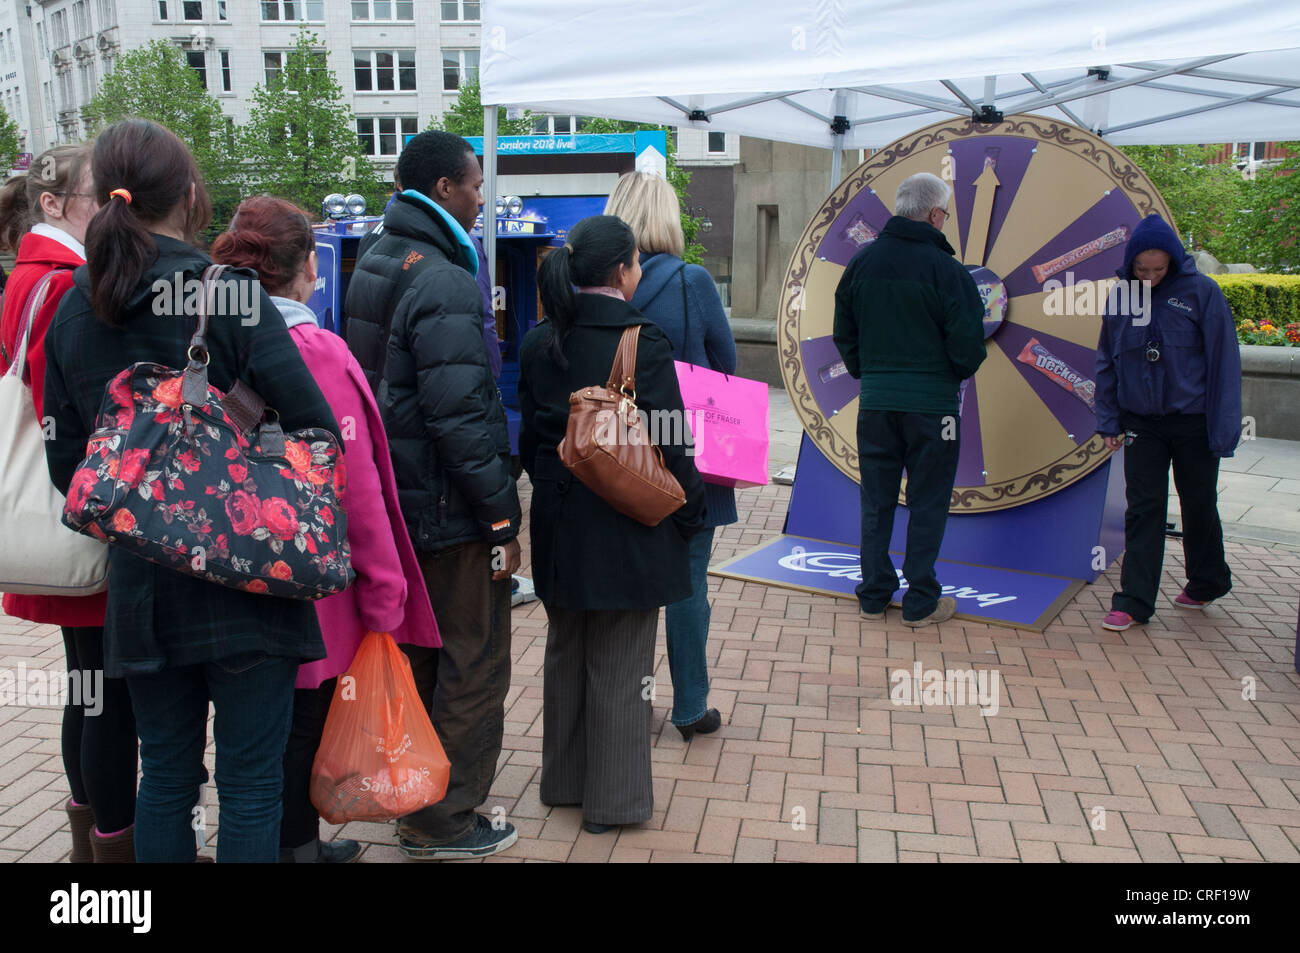 People queueing in Victoria Square, Birmingham, for a chance to win tickets to the 2012 Olympic Games in London Stock Photo